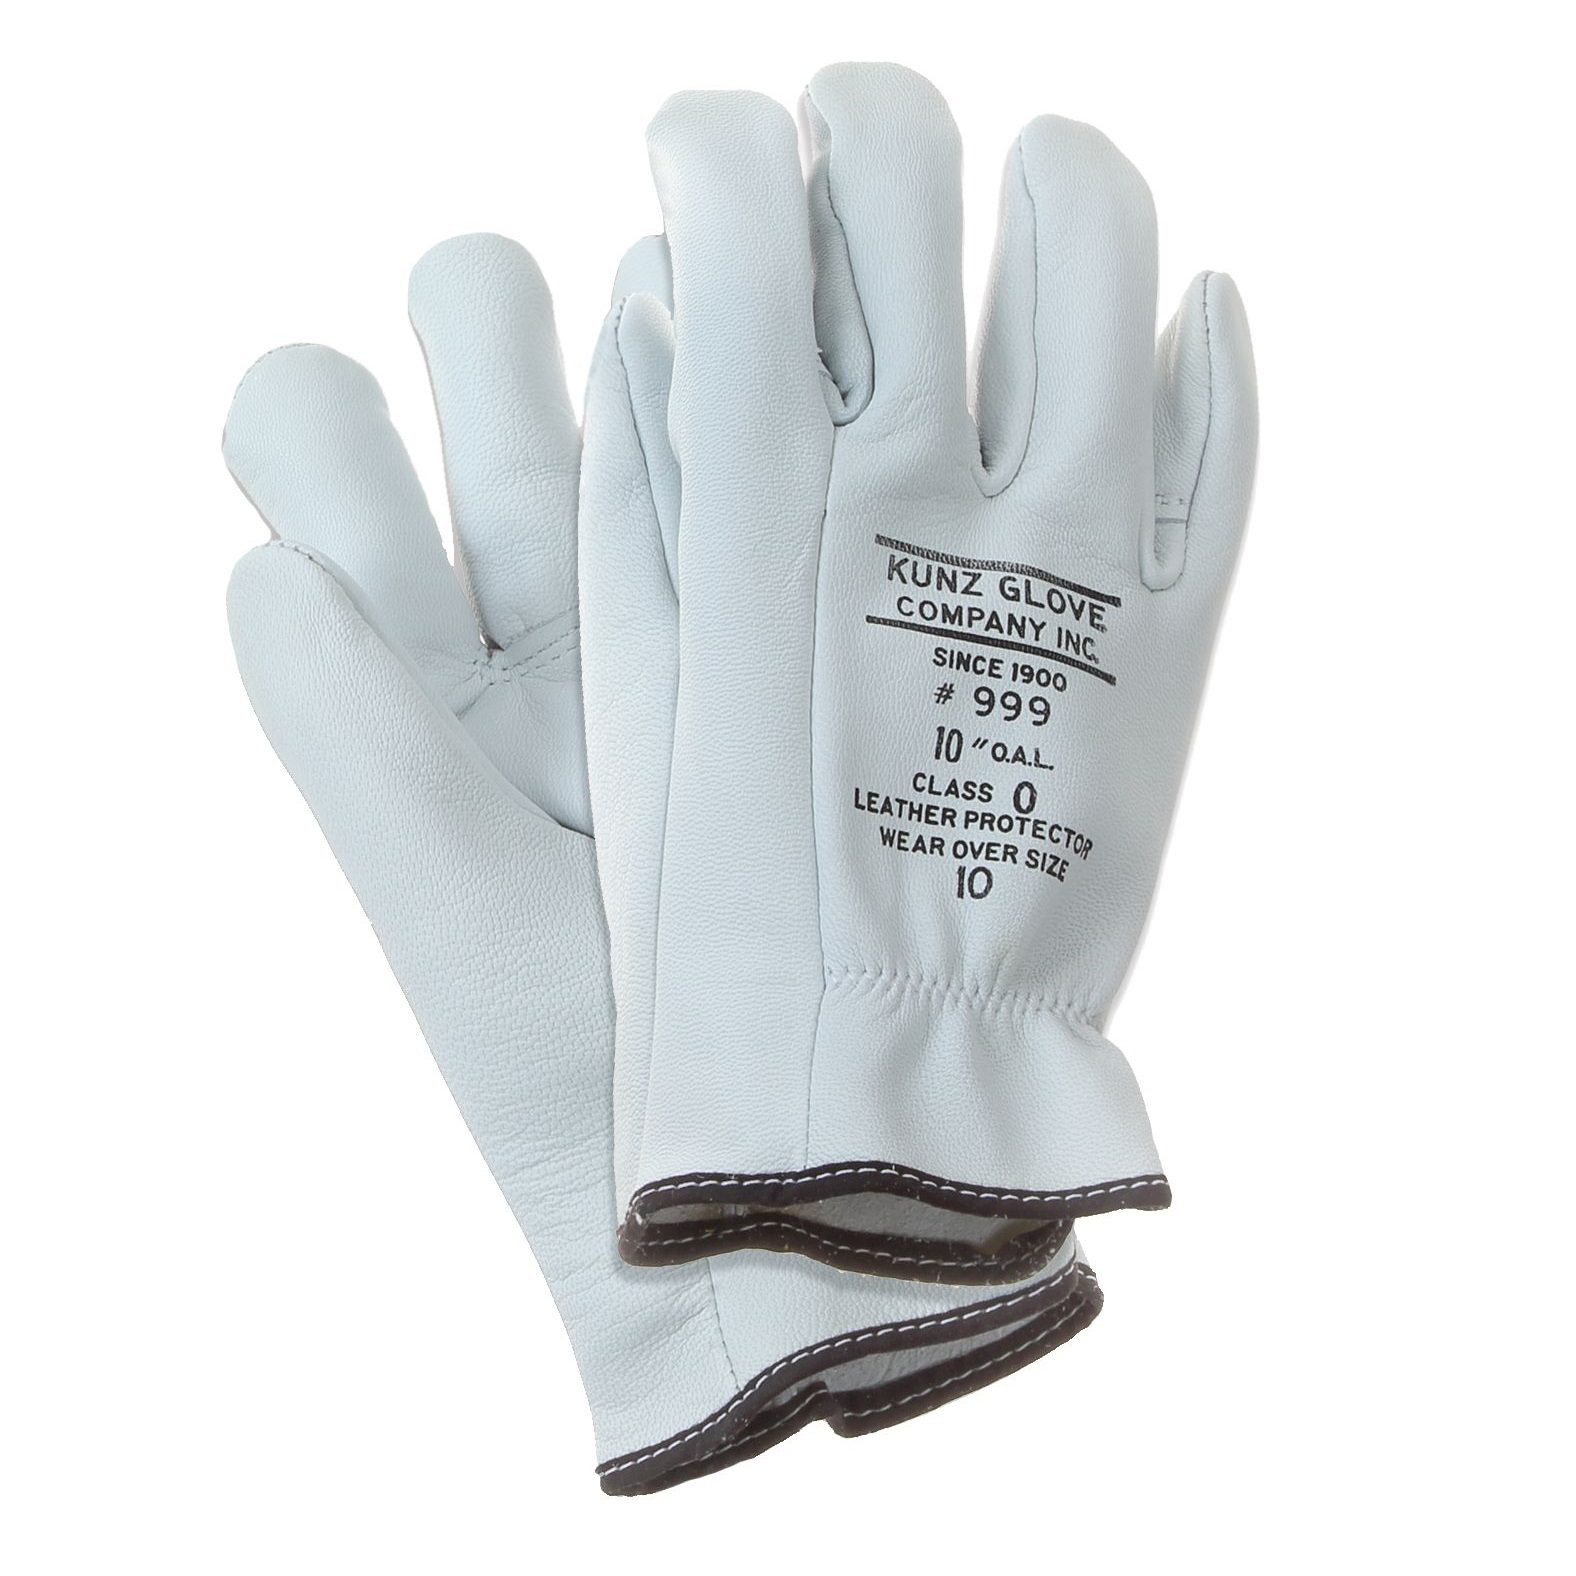 Catu Cg-981 Leather Over Gloves For Low Voltage Insulating Gloves